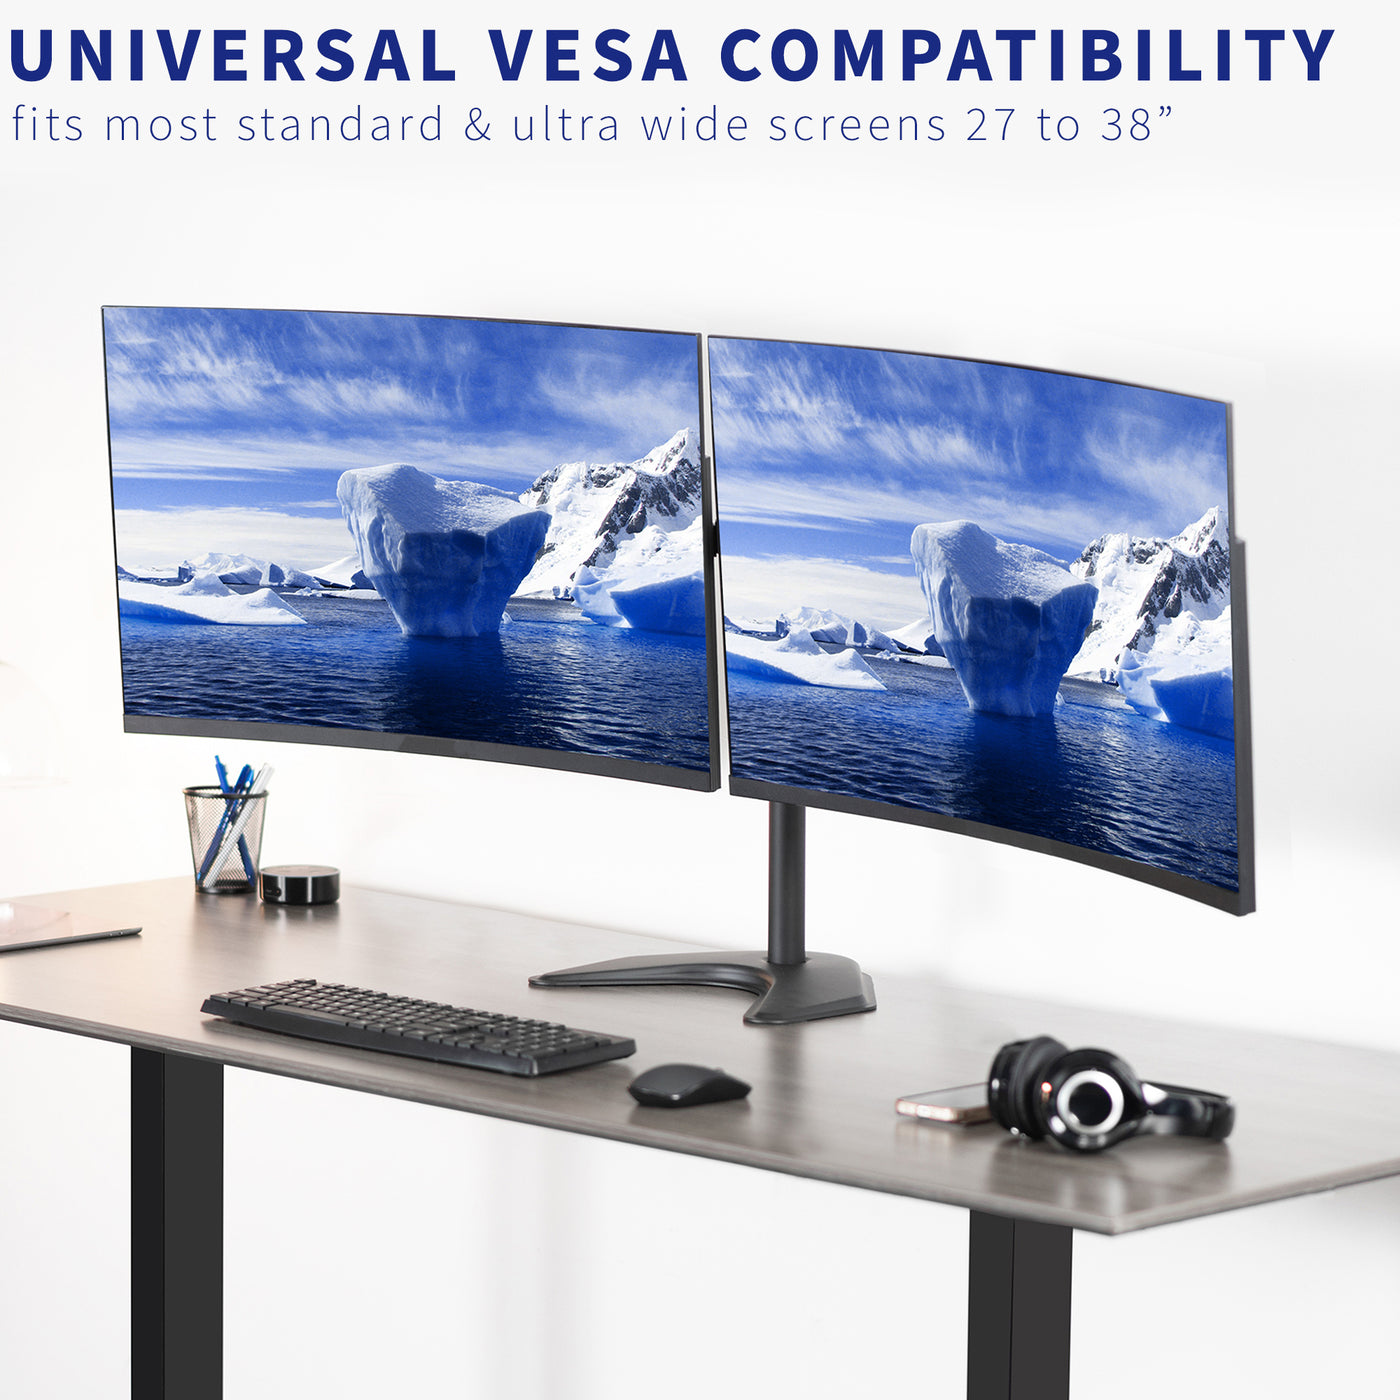 Telescoping adjustable arms of a dual monitor mount supporting most ultrawide screens ranging from 27 to 38 inches.